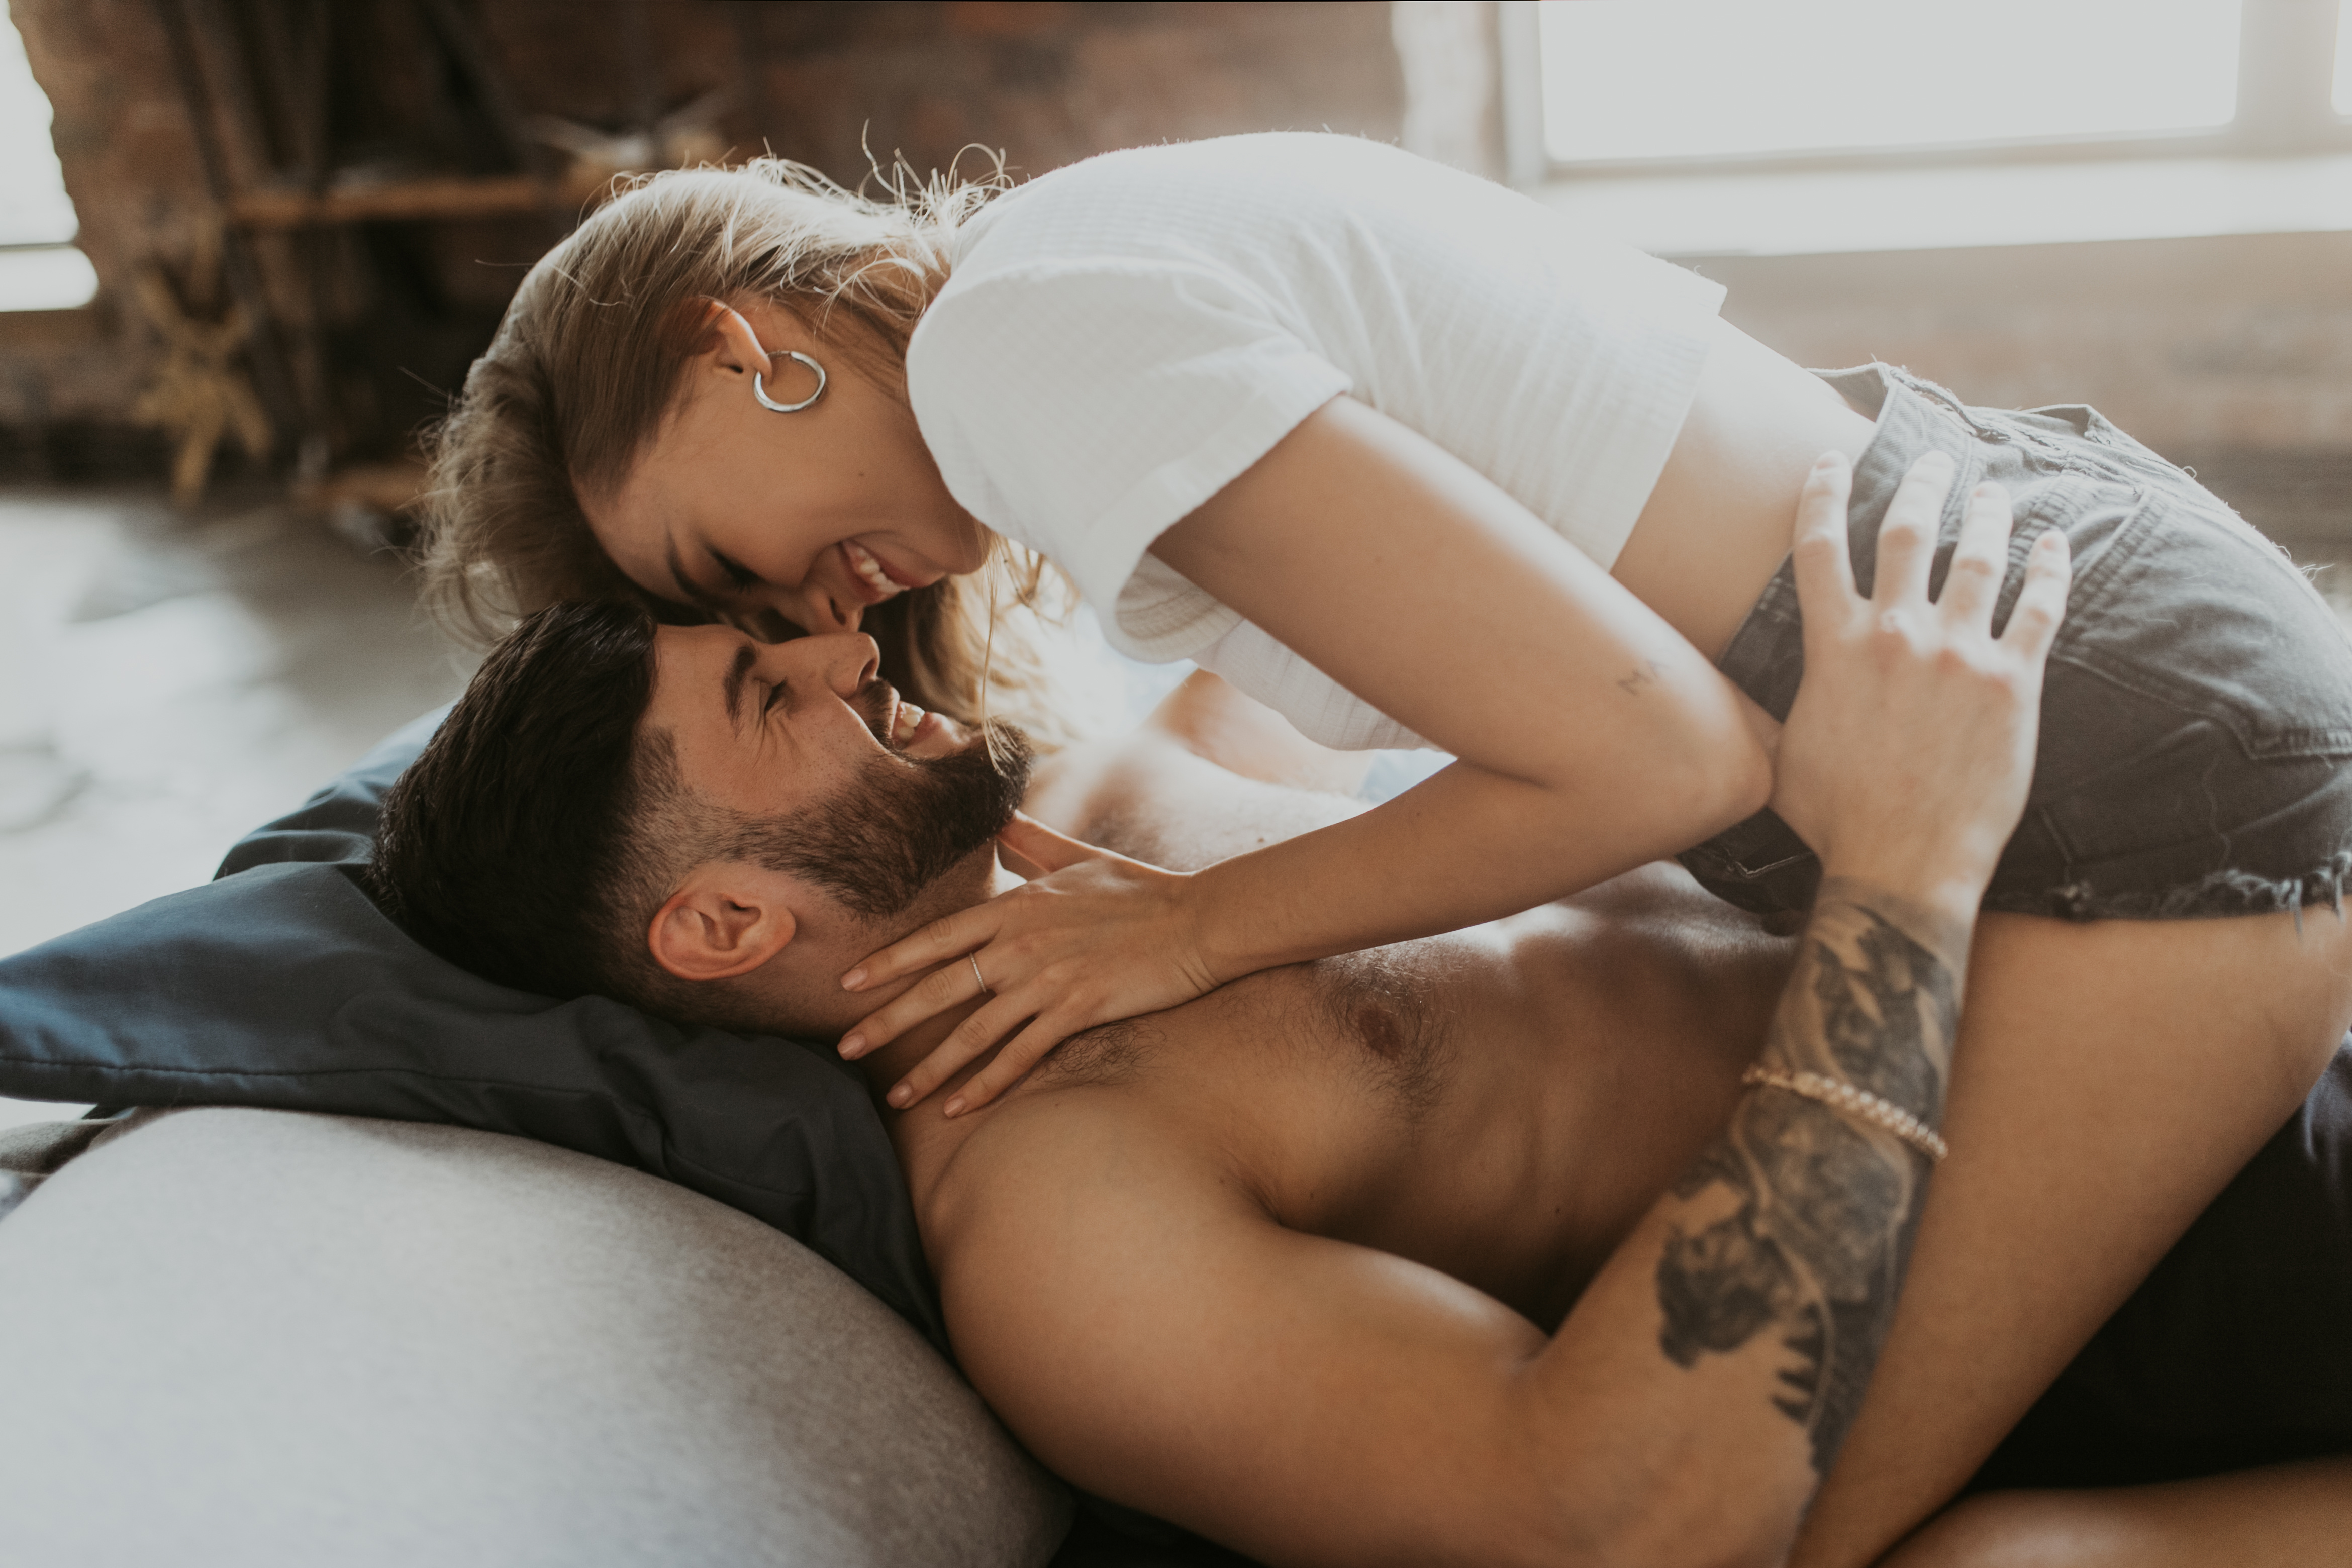 WHY MUTUAL MASTURBATION IS HEALTHY IN RELATIONSHIPS (AND HOW YOU CAN TRY IT)